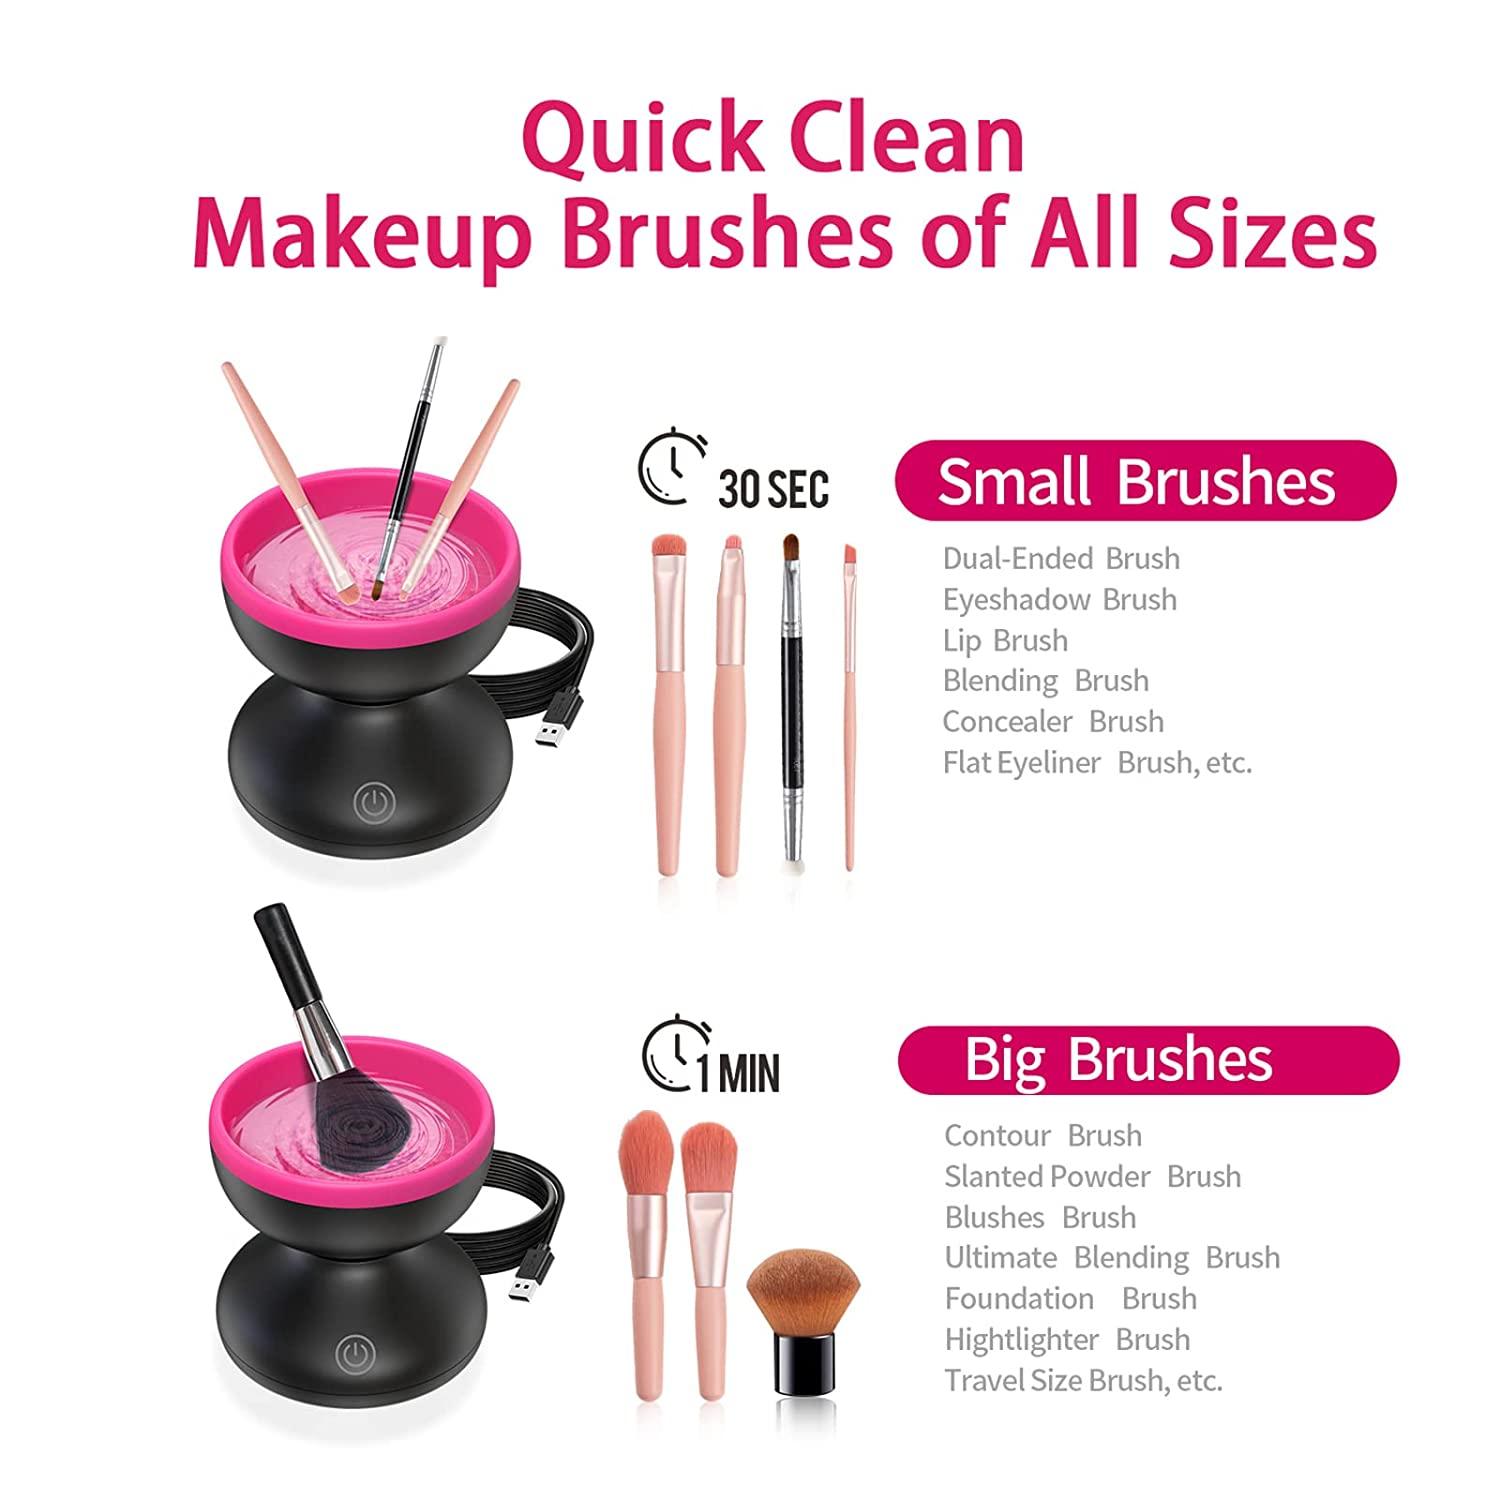 Electric Makeup Brush Cleaner Machine - Alyfini Portable Automatic USB Cosmetic Brush Cleaner Tools for All Size Beauty Makeup Brushes Set (Black)